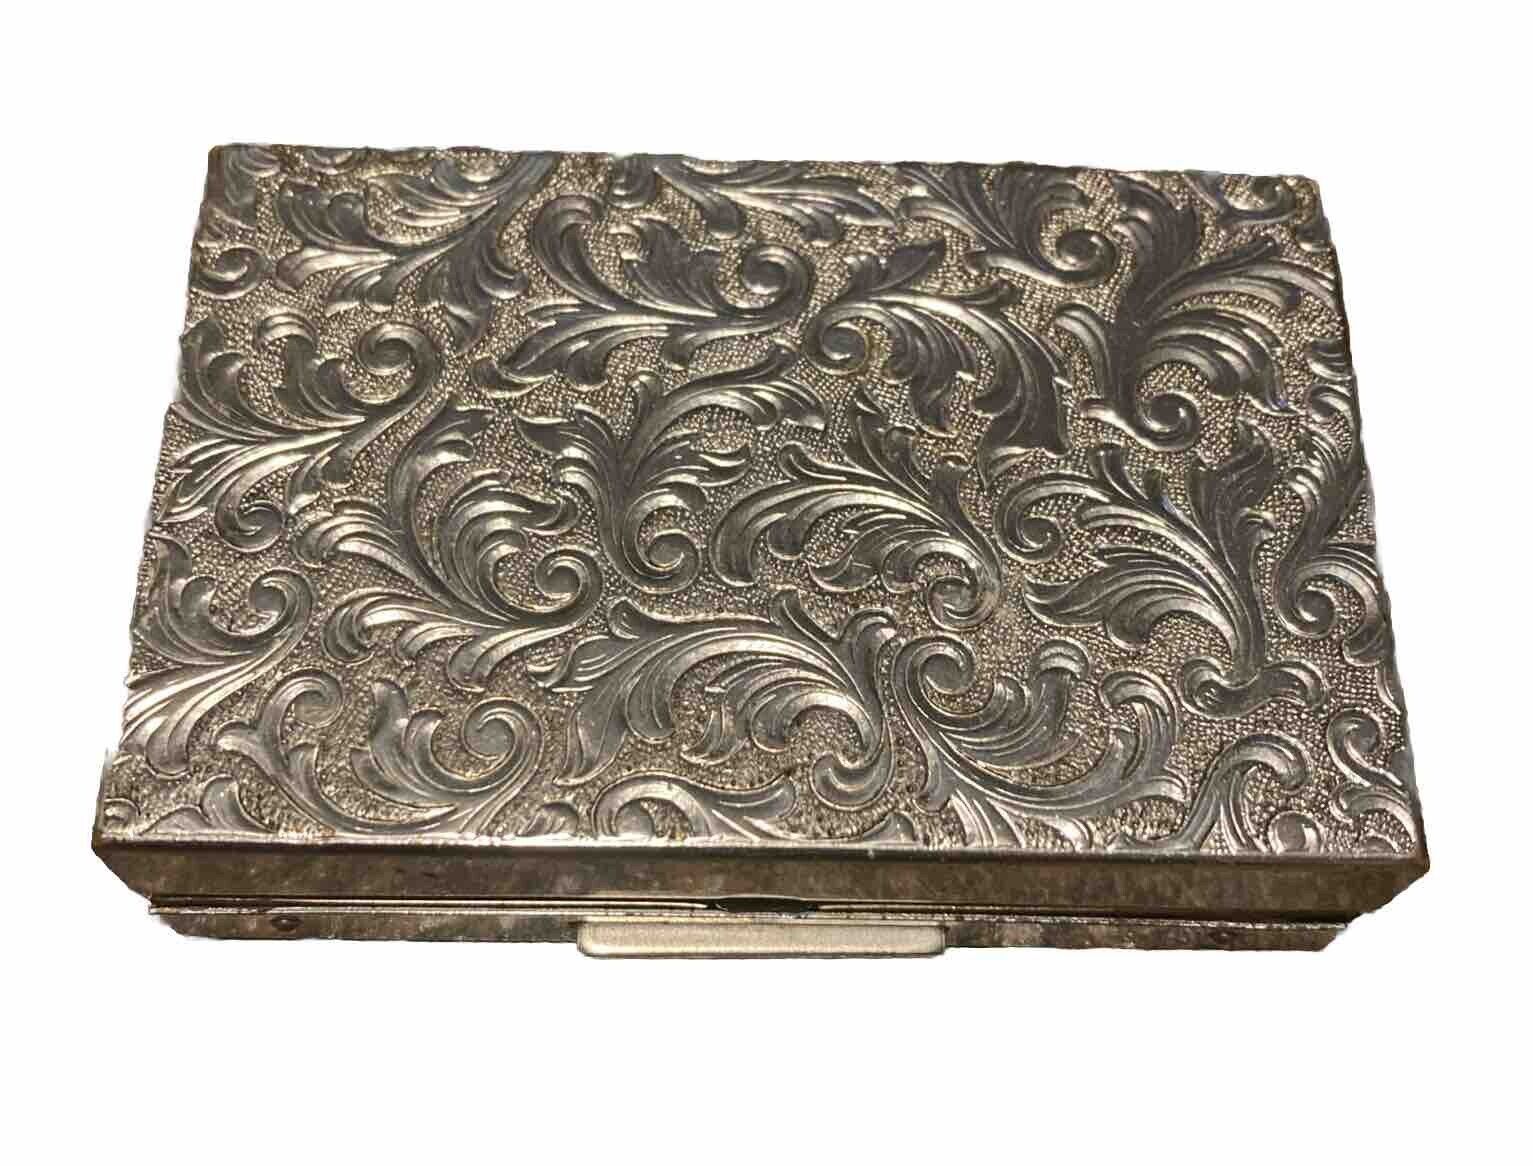 Beautiful Vintage Etched Silver Color Elgin American Compact Music Box